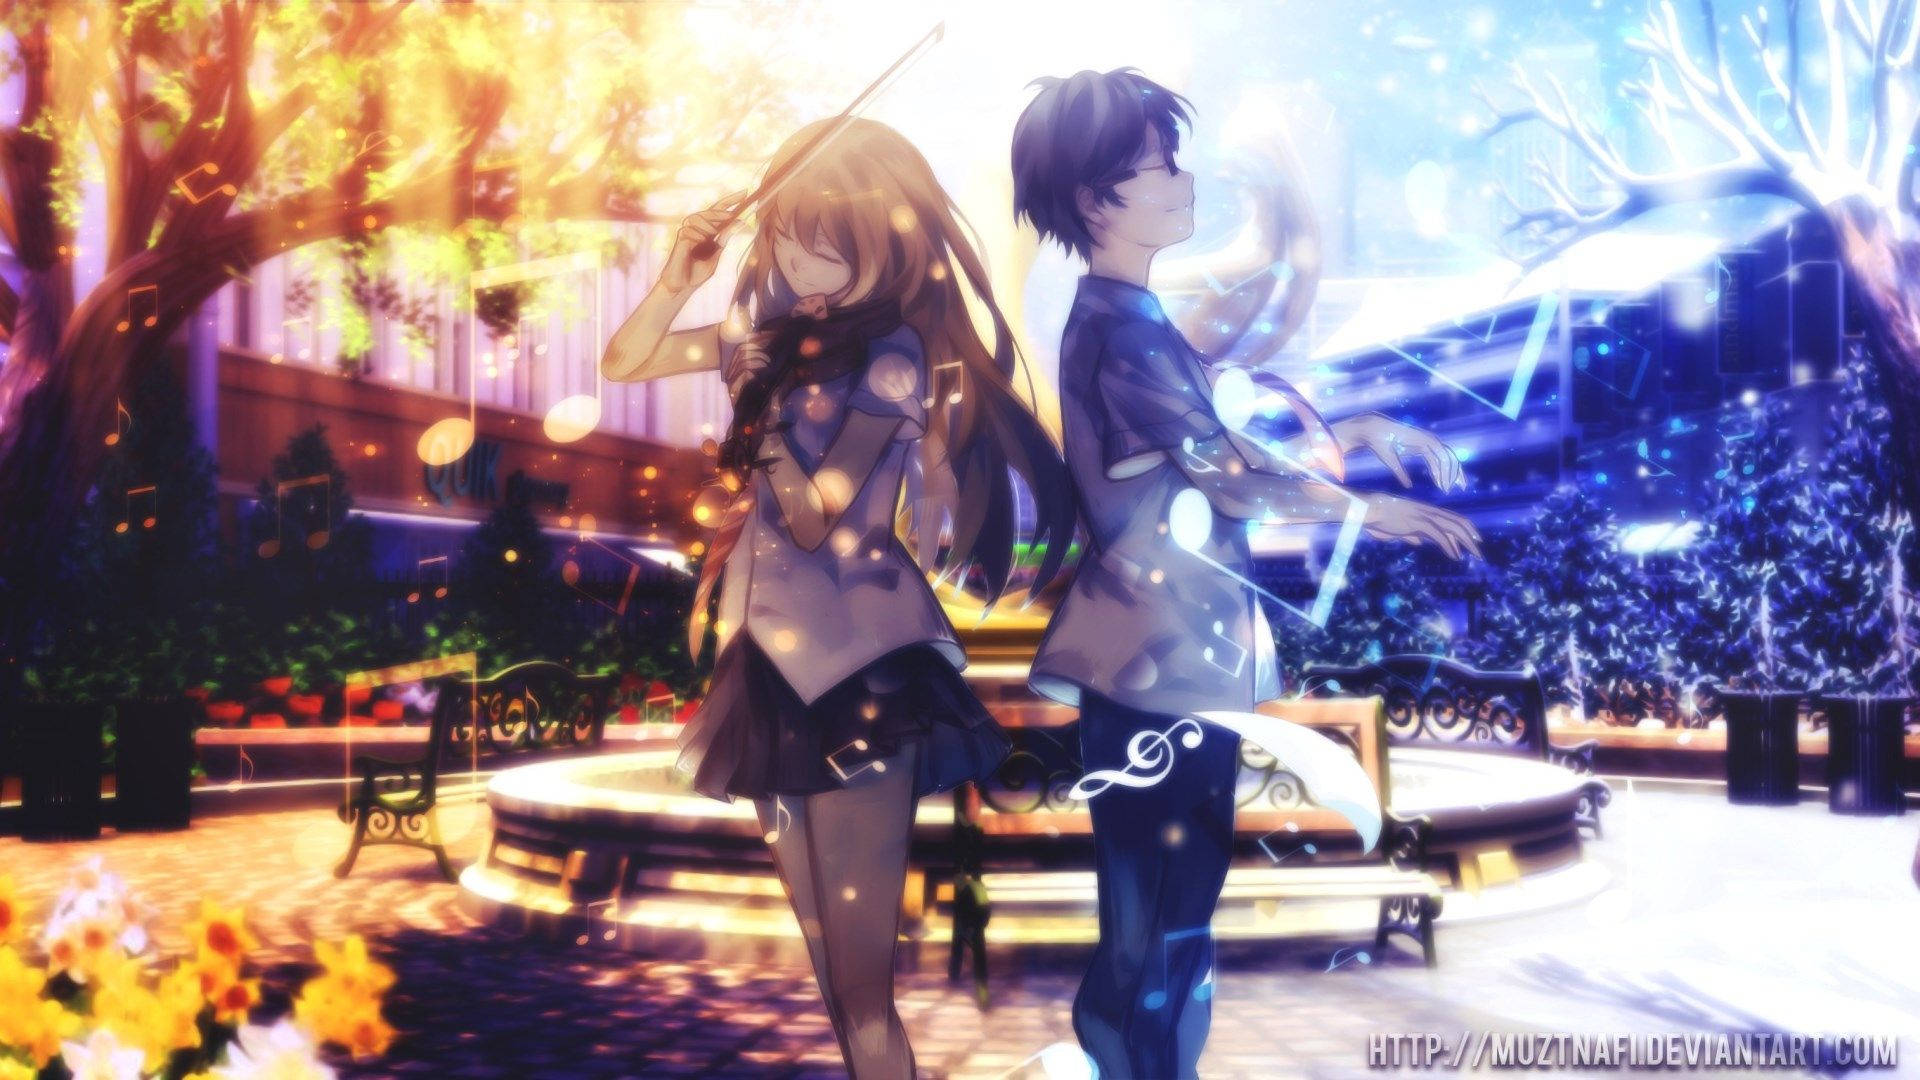 Free Your Lie In April Wallpaper Downloads, [100+] Your Lie In April  Wallpapers for FREE 